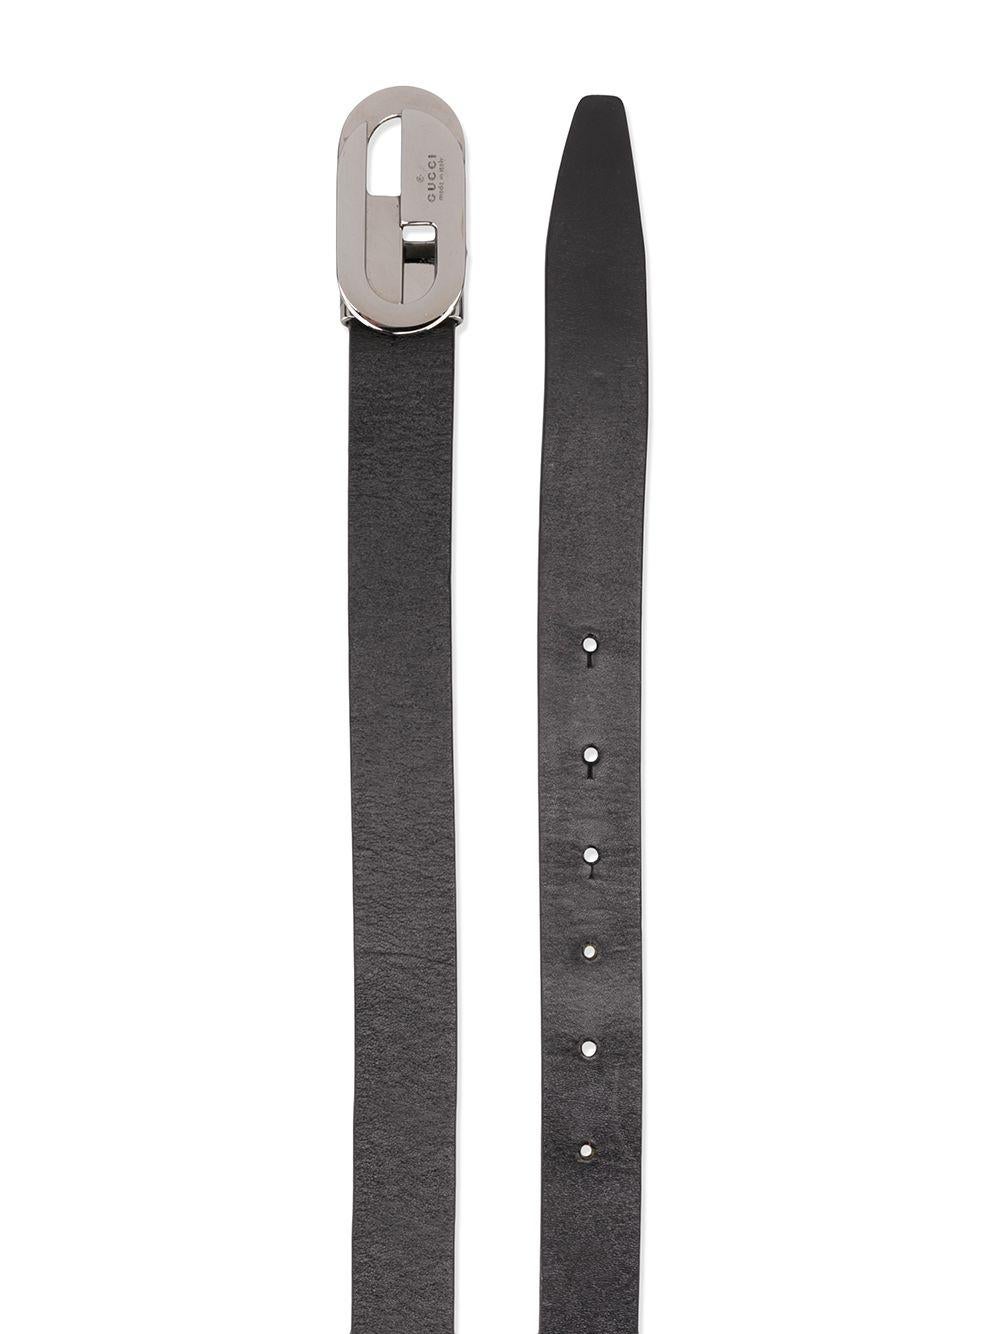 Crafted in France from pure black calf leather, this pre-owned belt by Gucci features an adjustable fit, a slim design and the signature 'GG' logo buckle accented by contrasting silver-tone metal hardware.

Colour: Black/ Silver

Composition: Calf